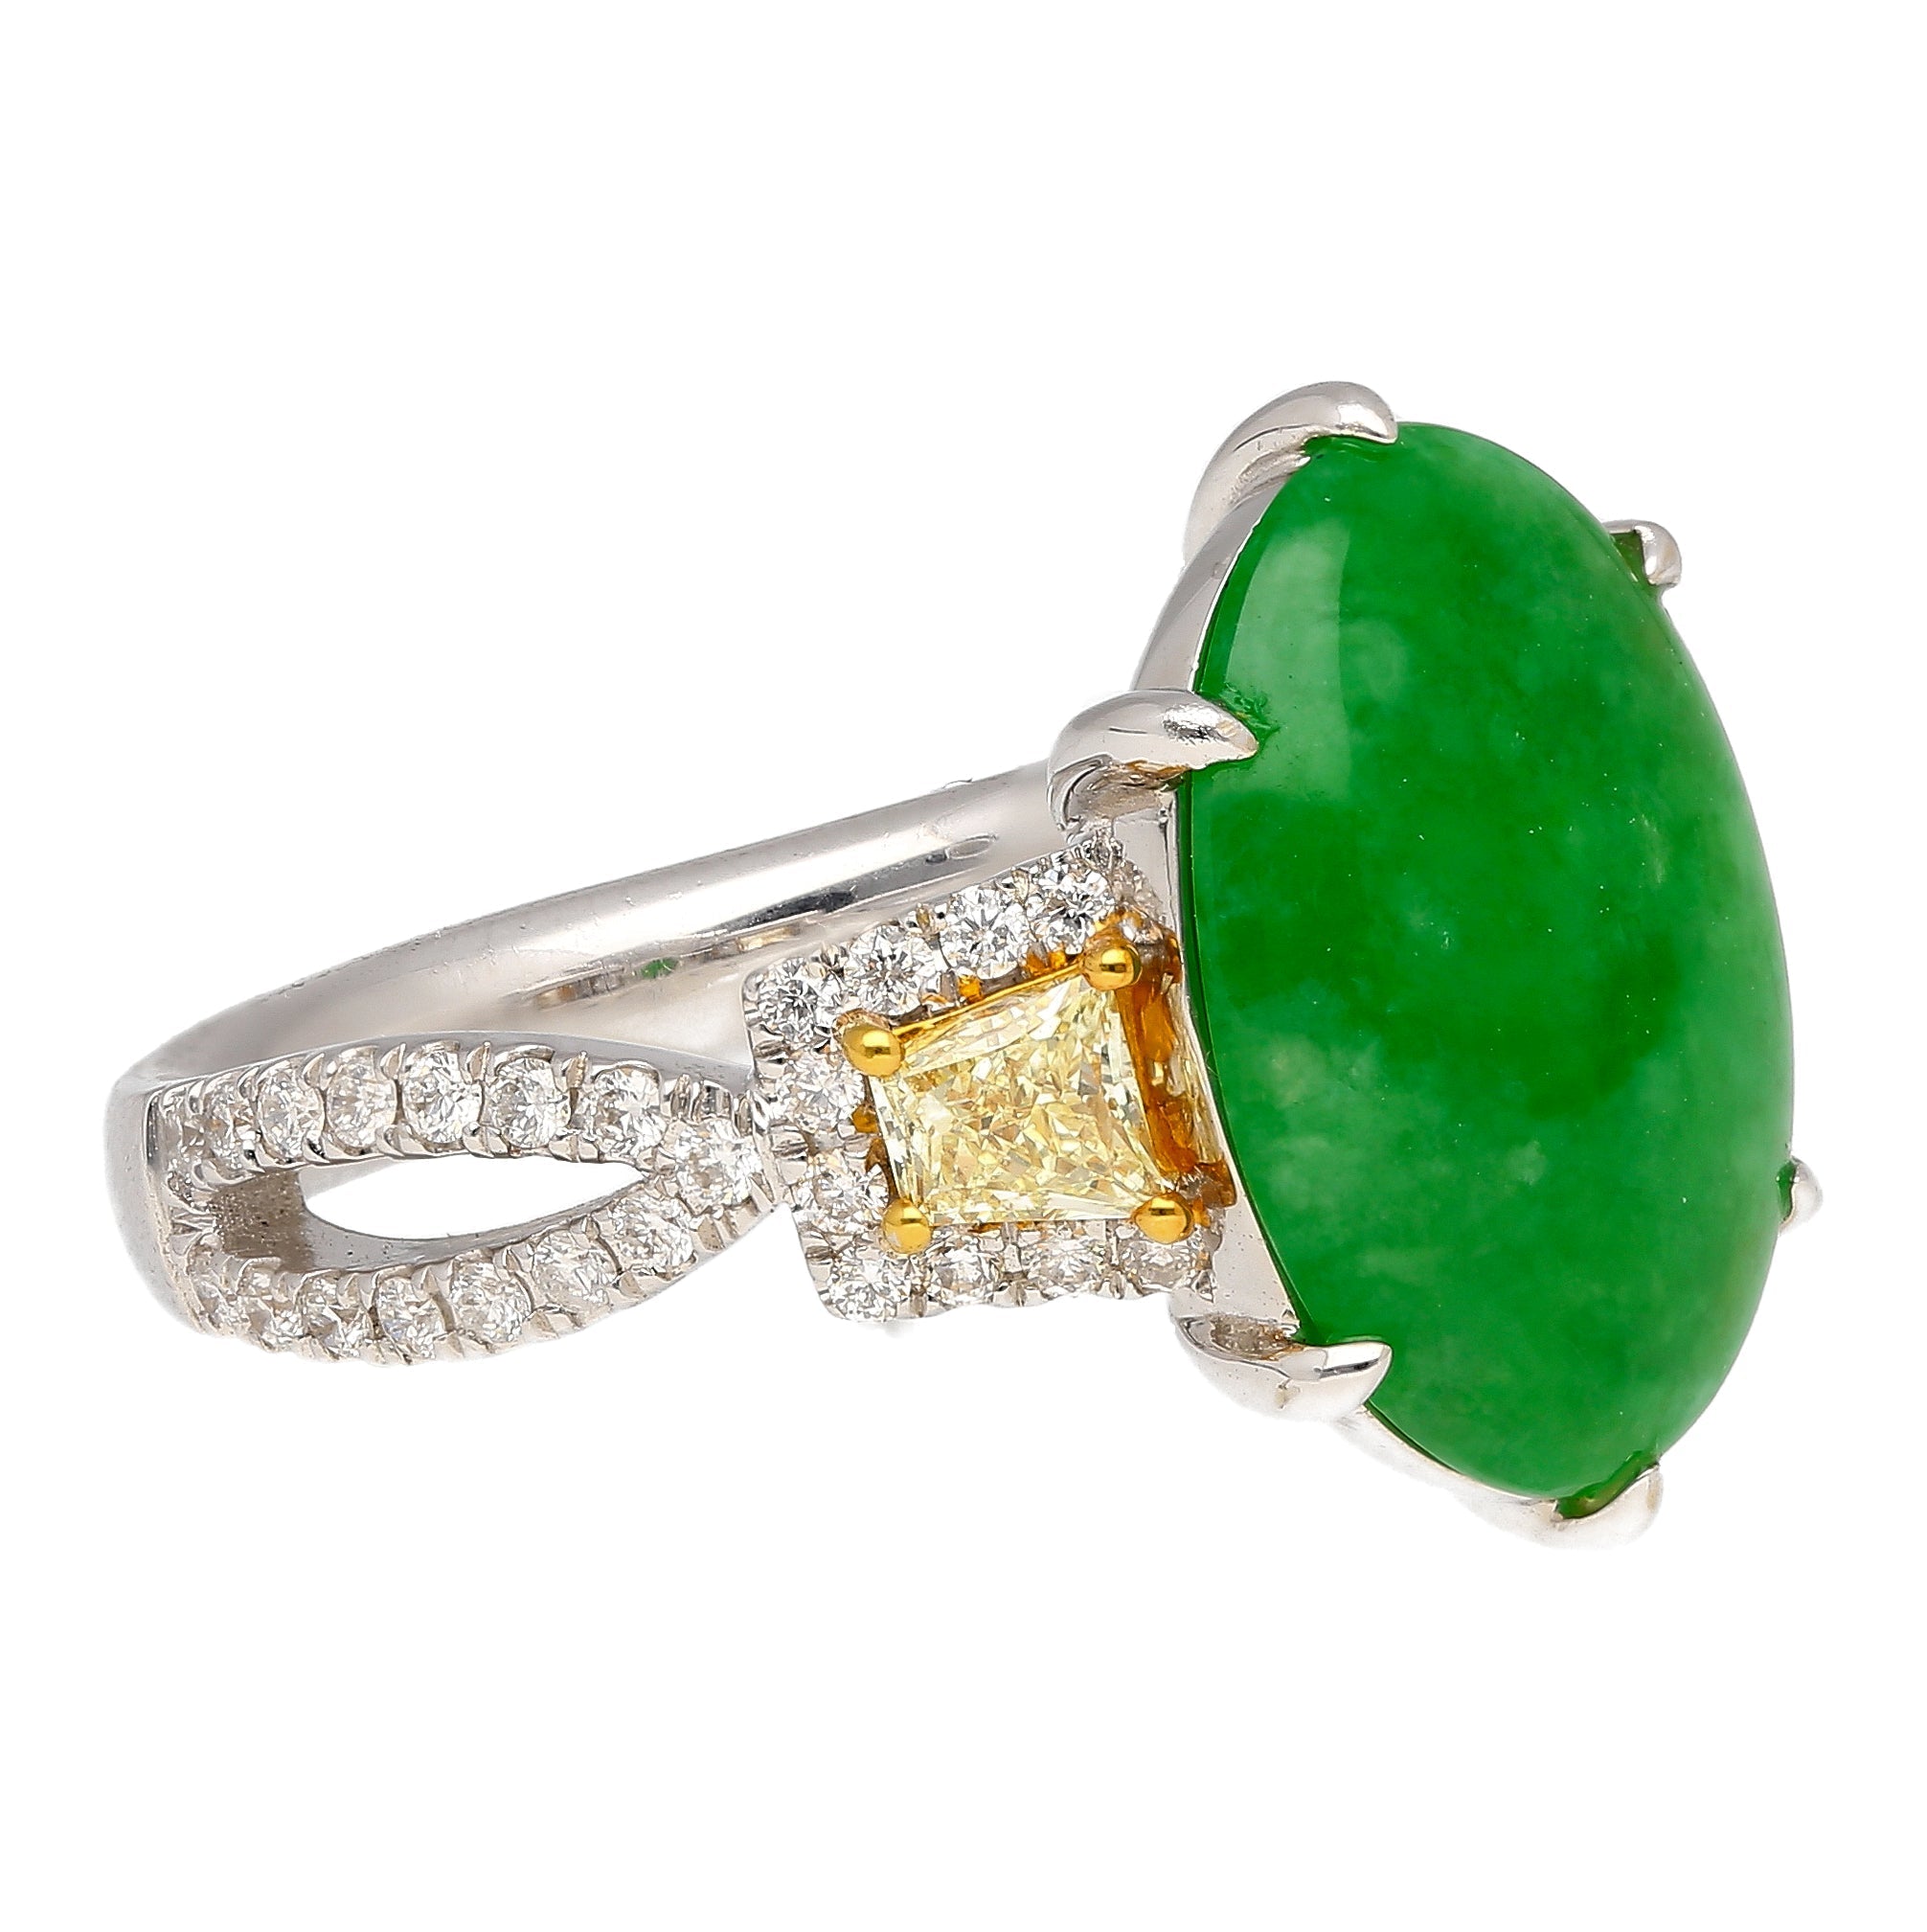 4.76 Carat Jadeite Jade with Trapezoid Cut Yellow Diamond Side Stone Ring in 18k White Gold